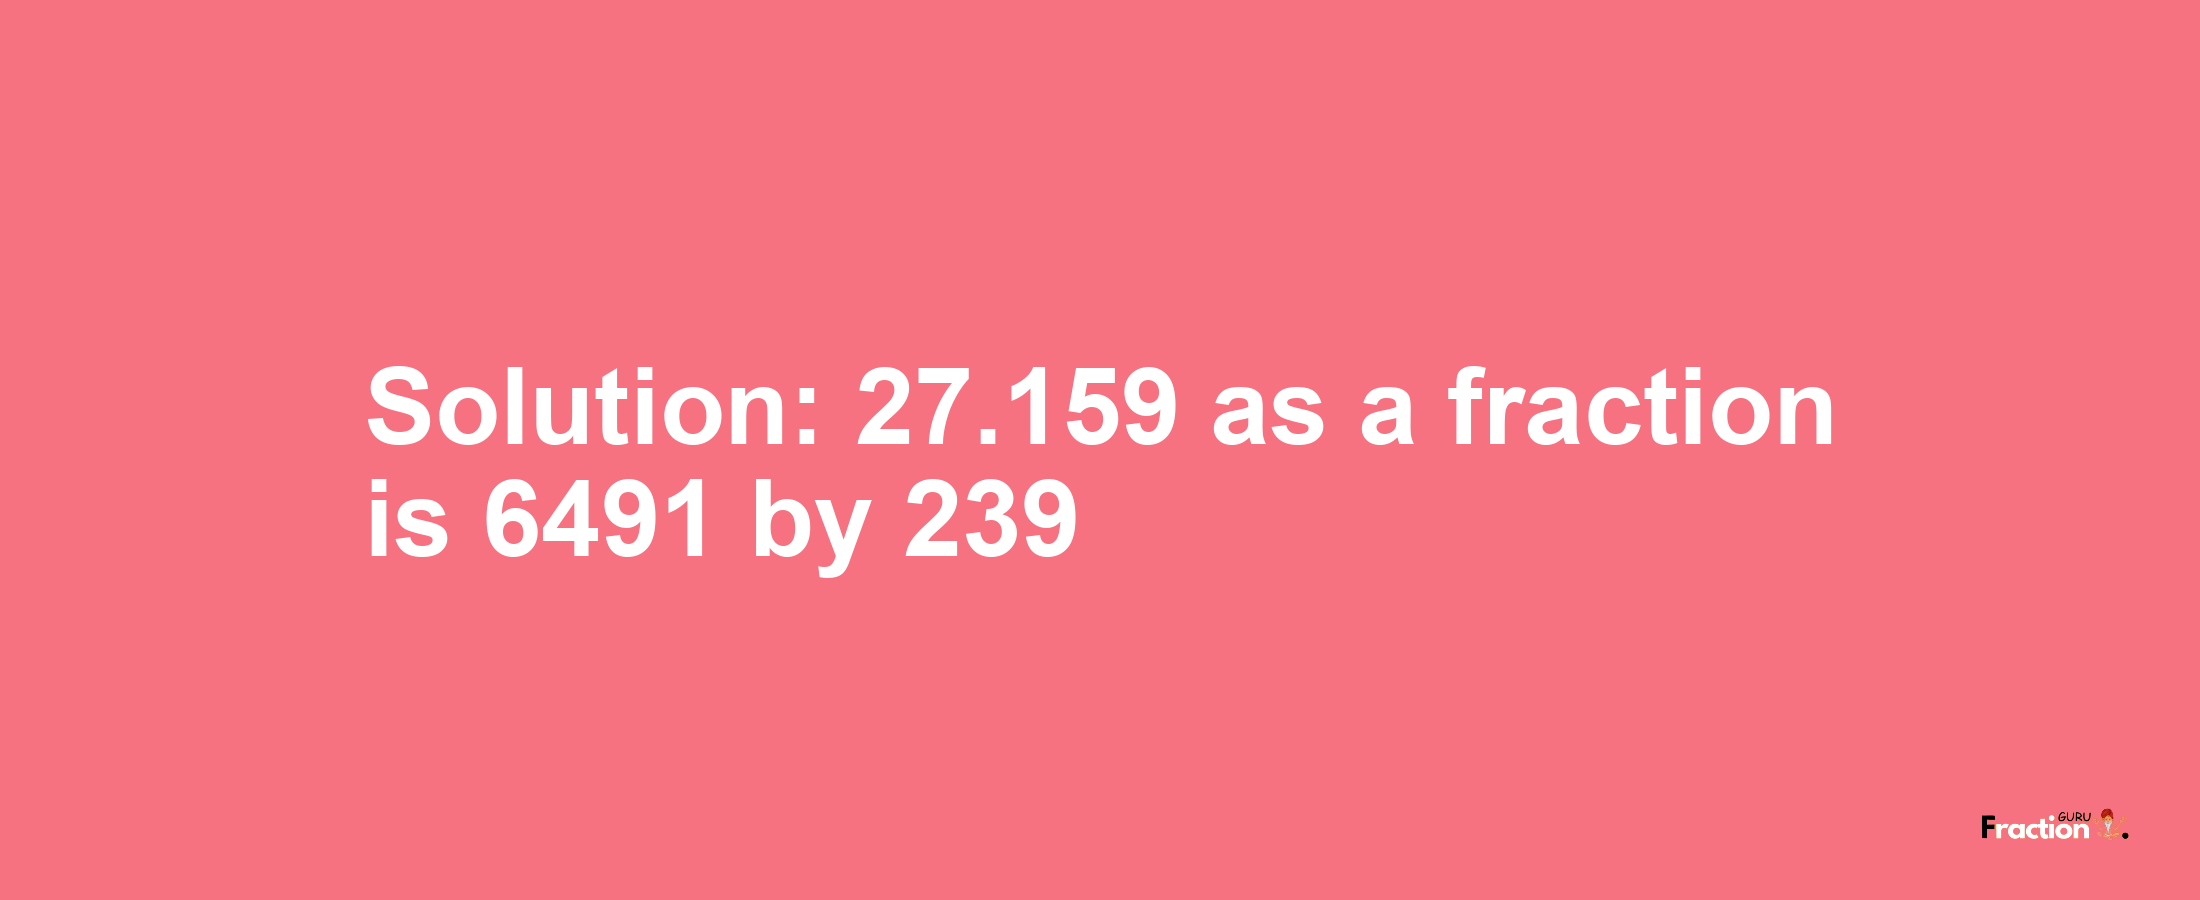 Solution:27.159 as a fraction is 6491/239